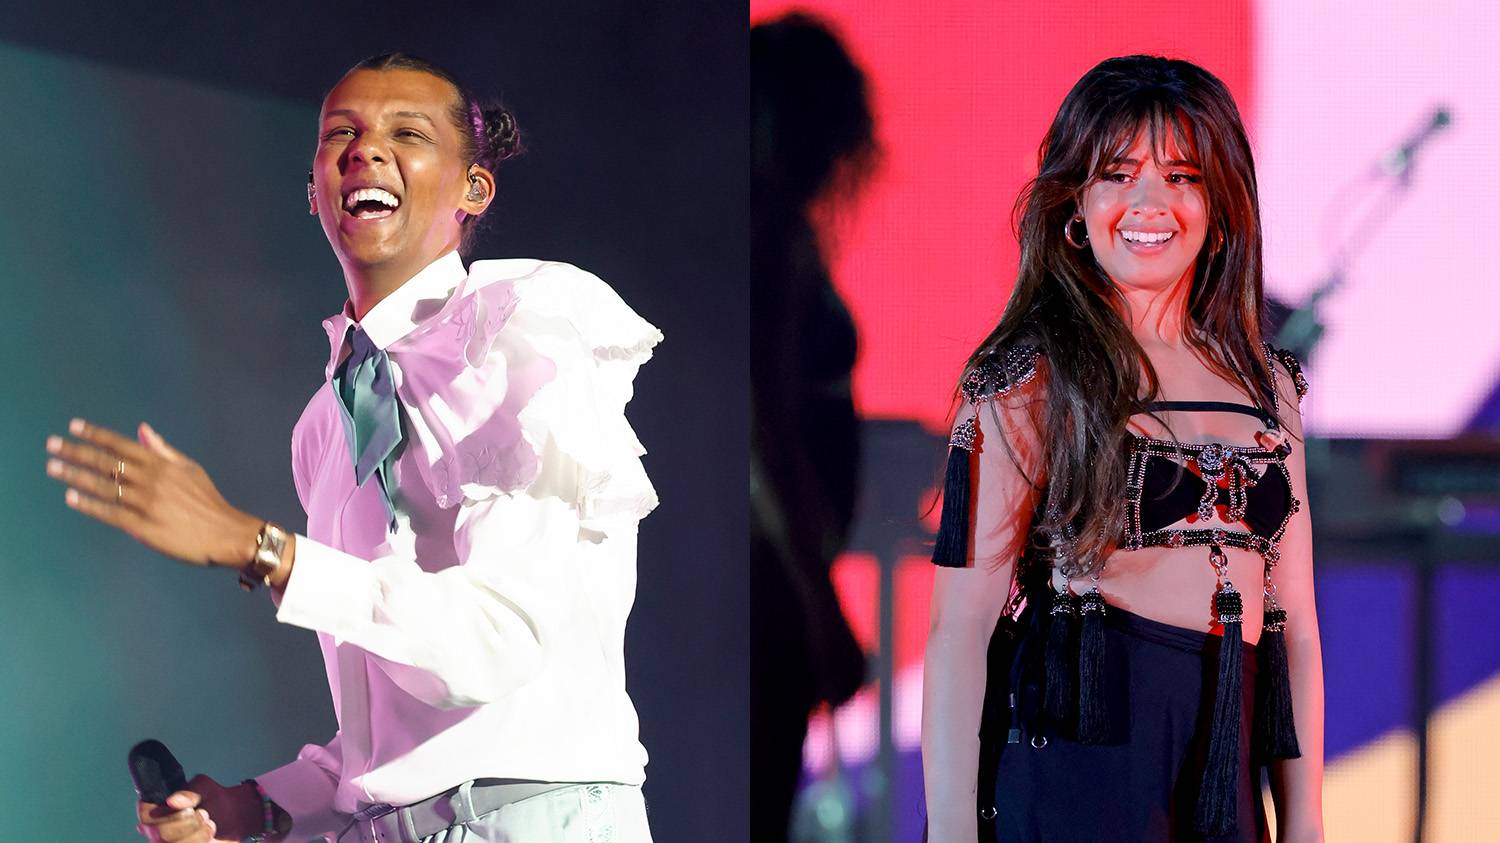 A diptych image of Stromae and Camila Cabello.